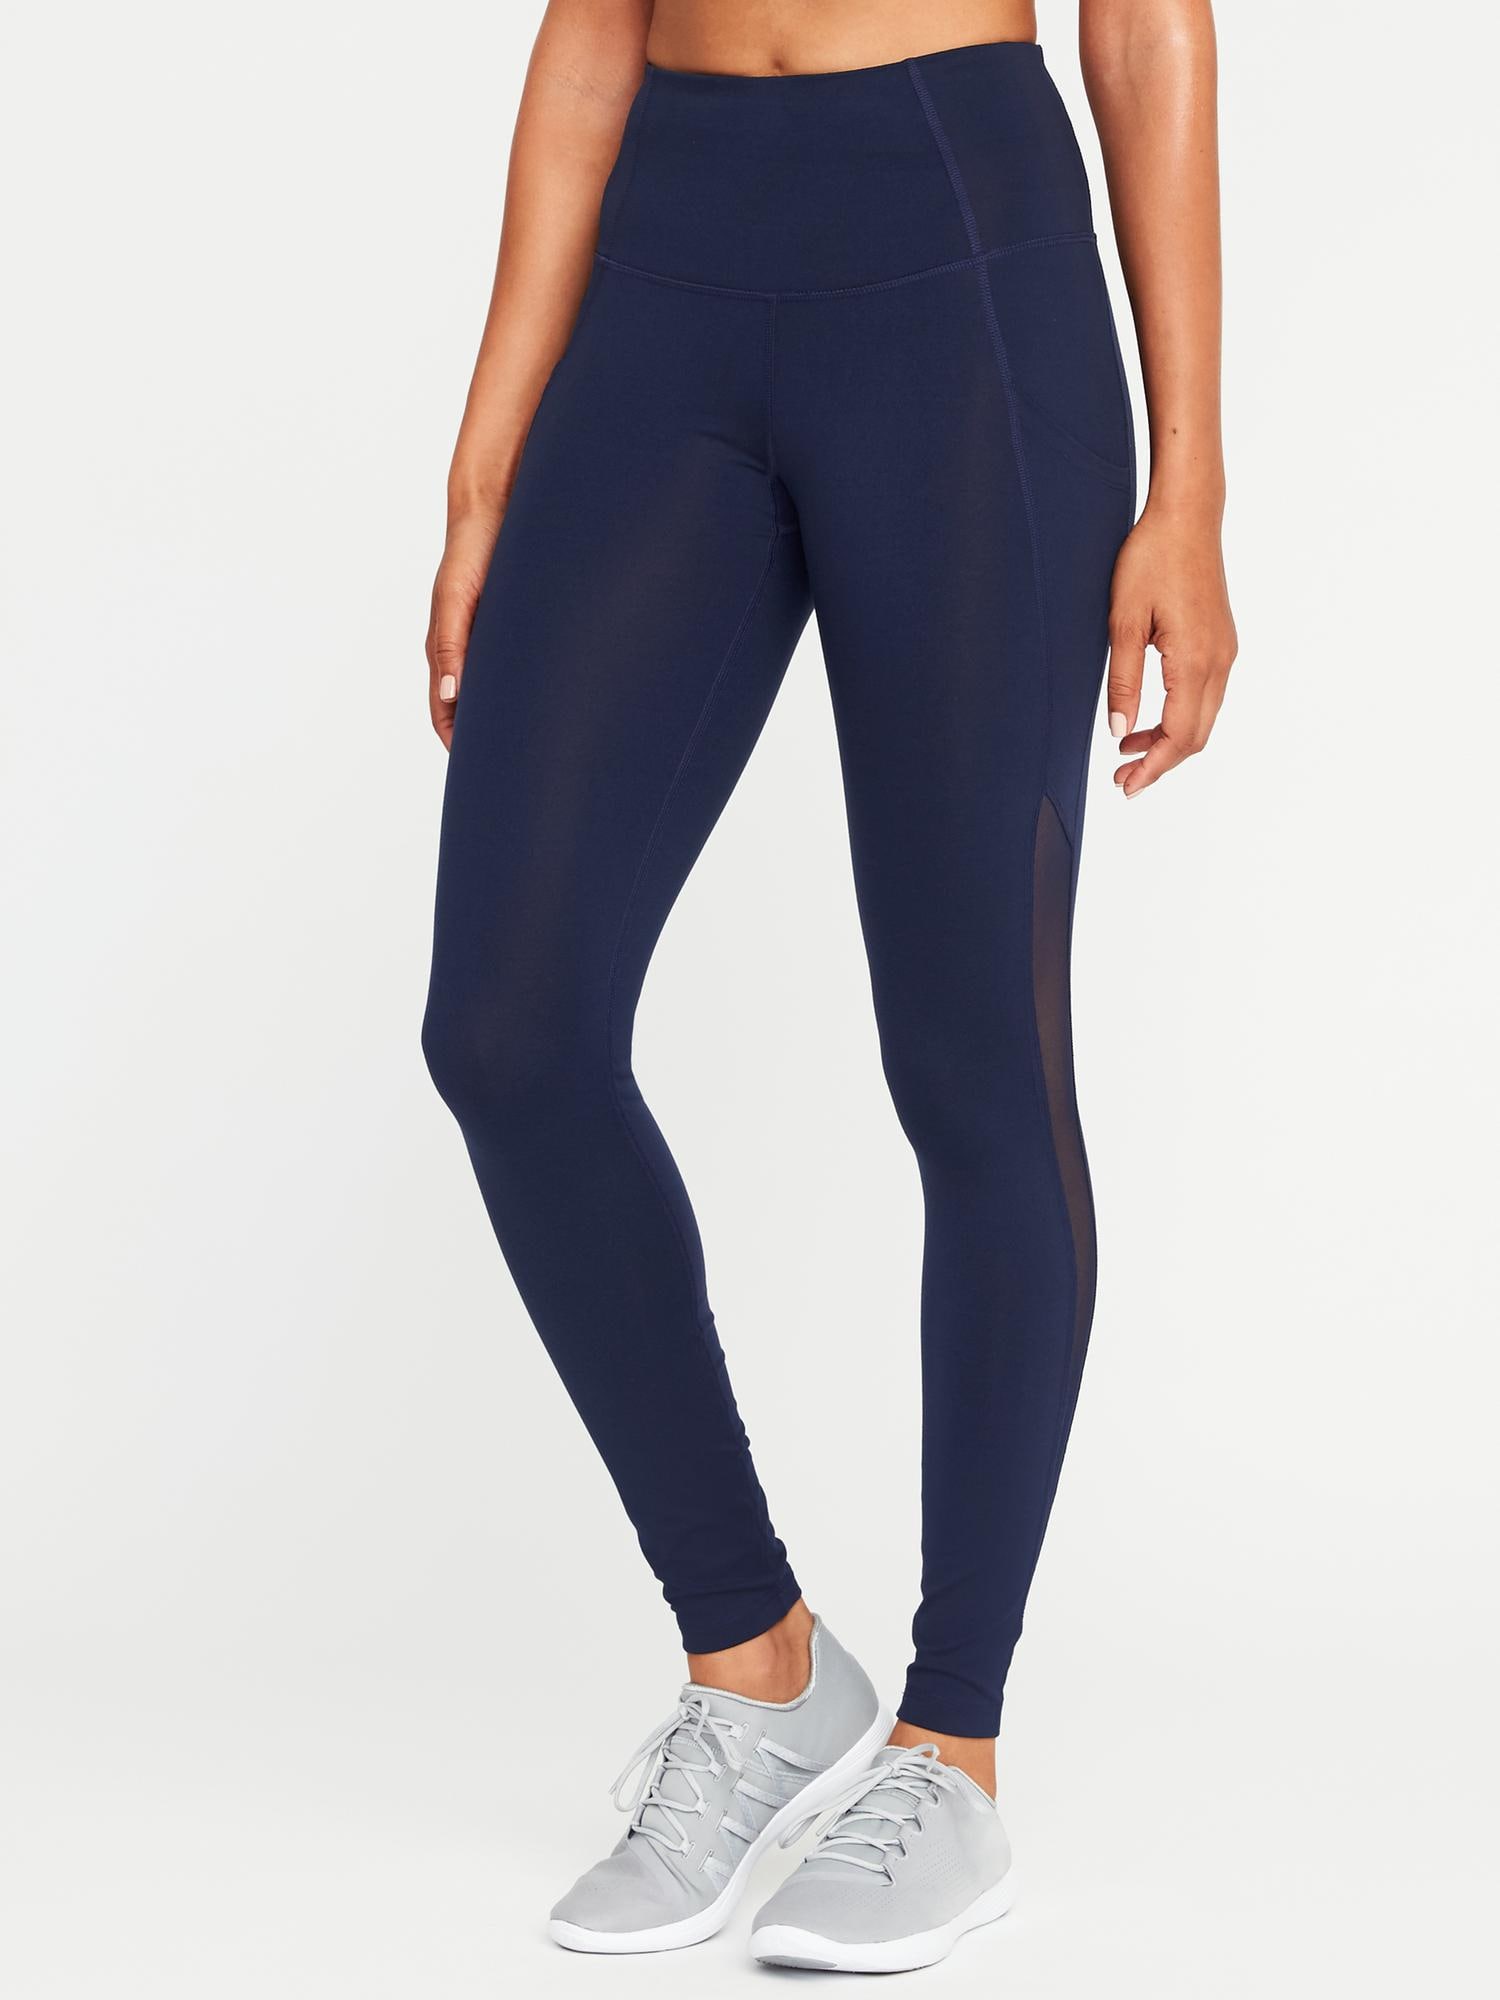 High-Rise Compression Leggings for Women, Old Navy